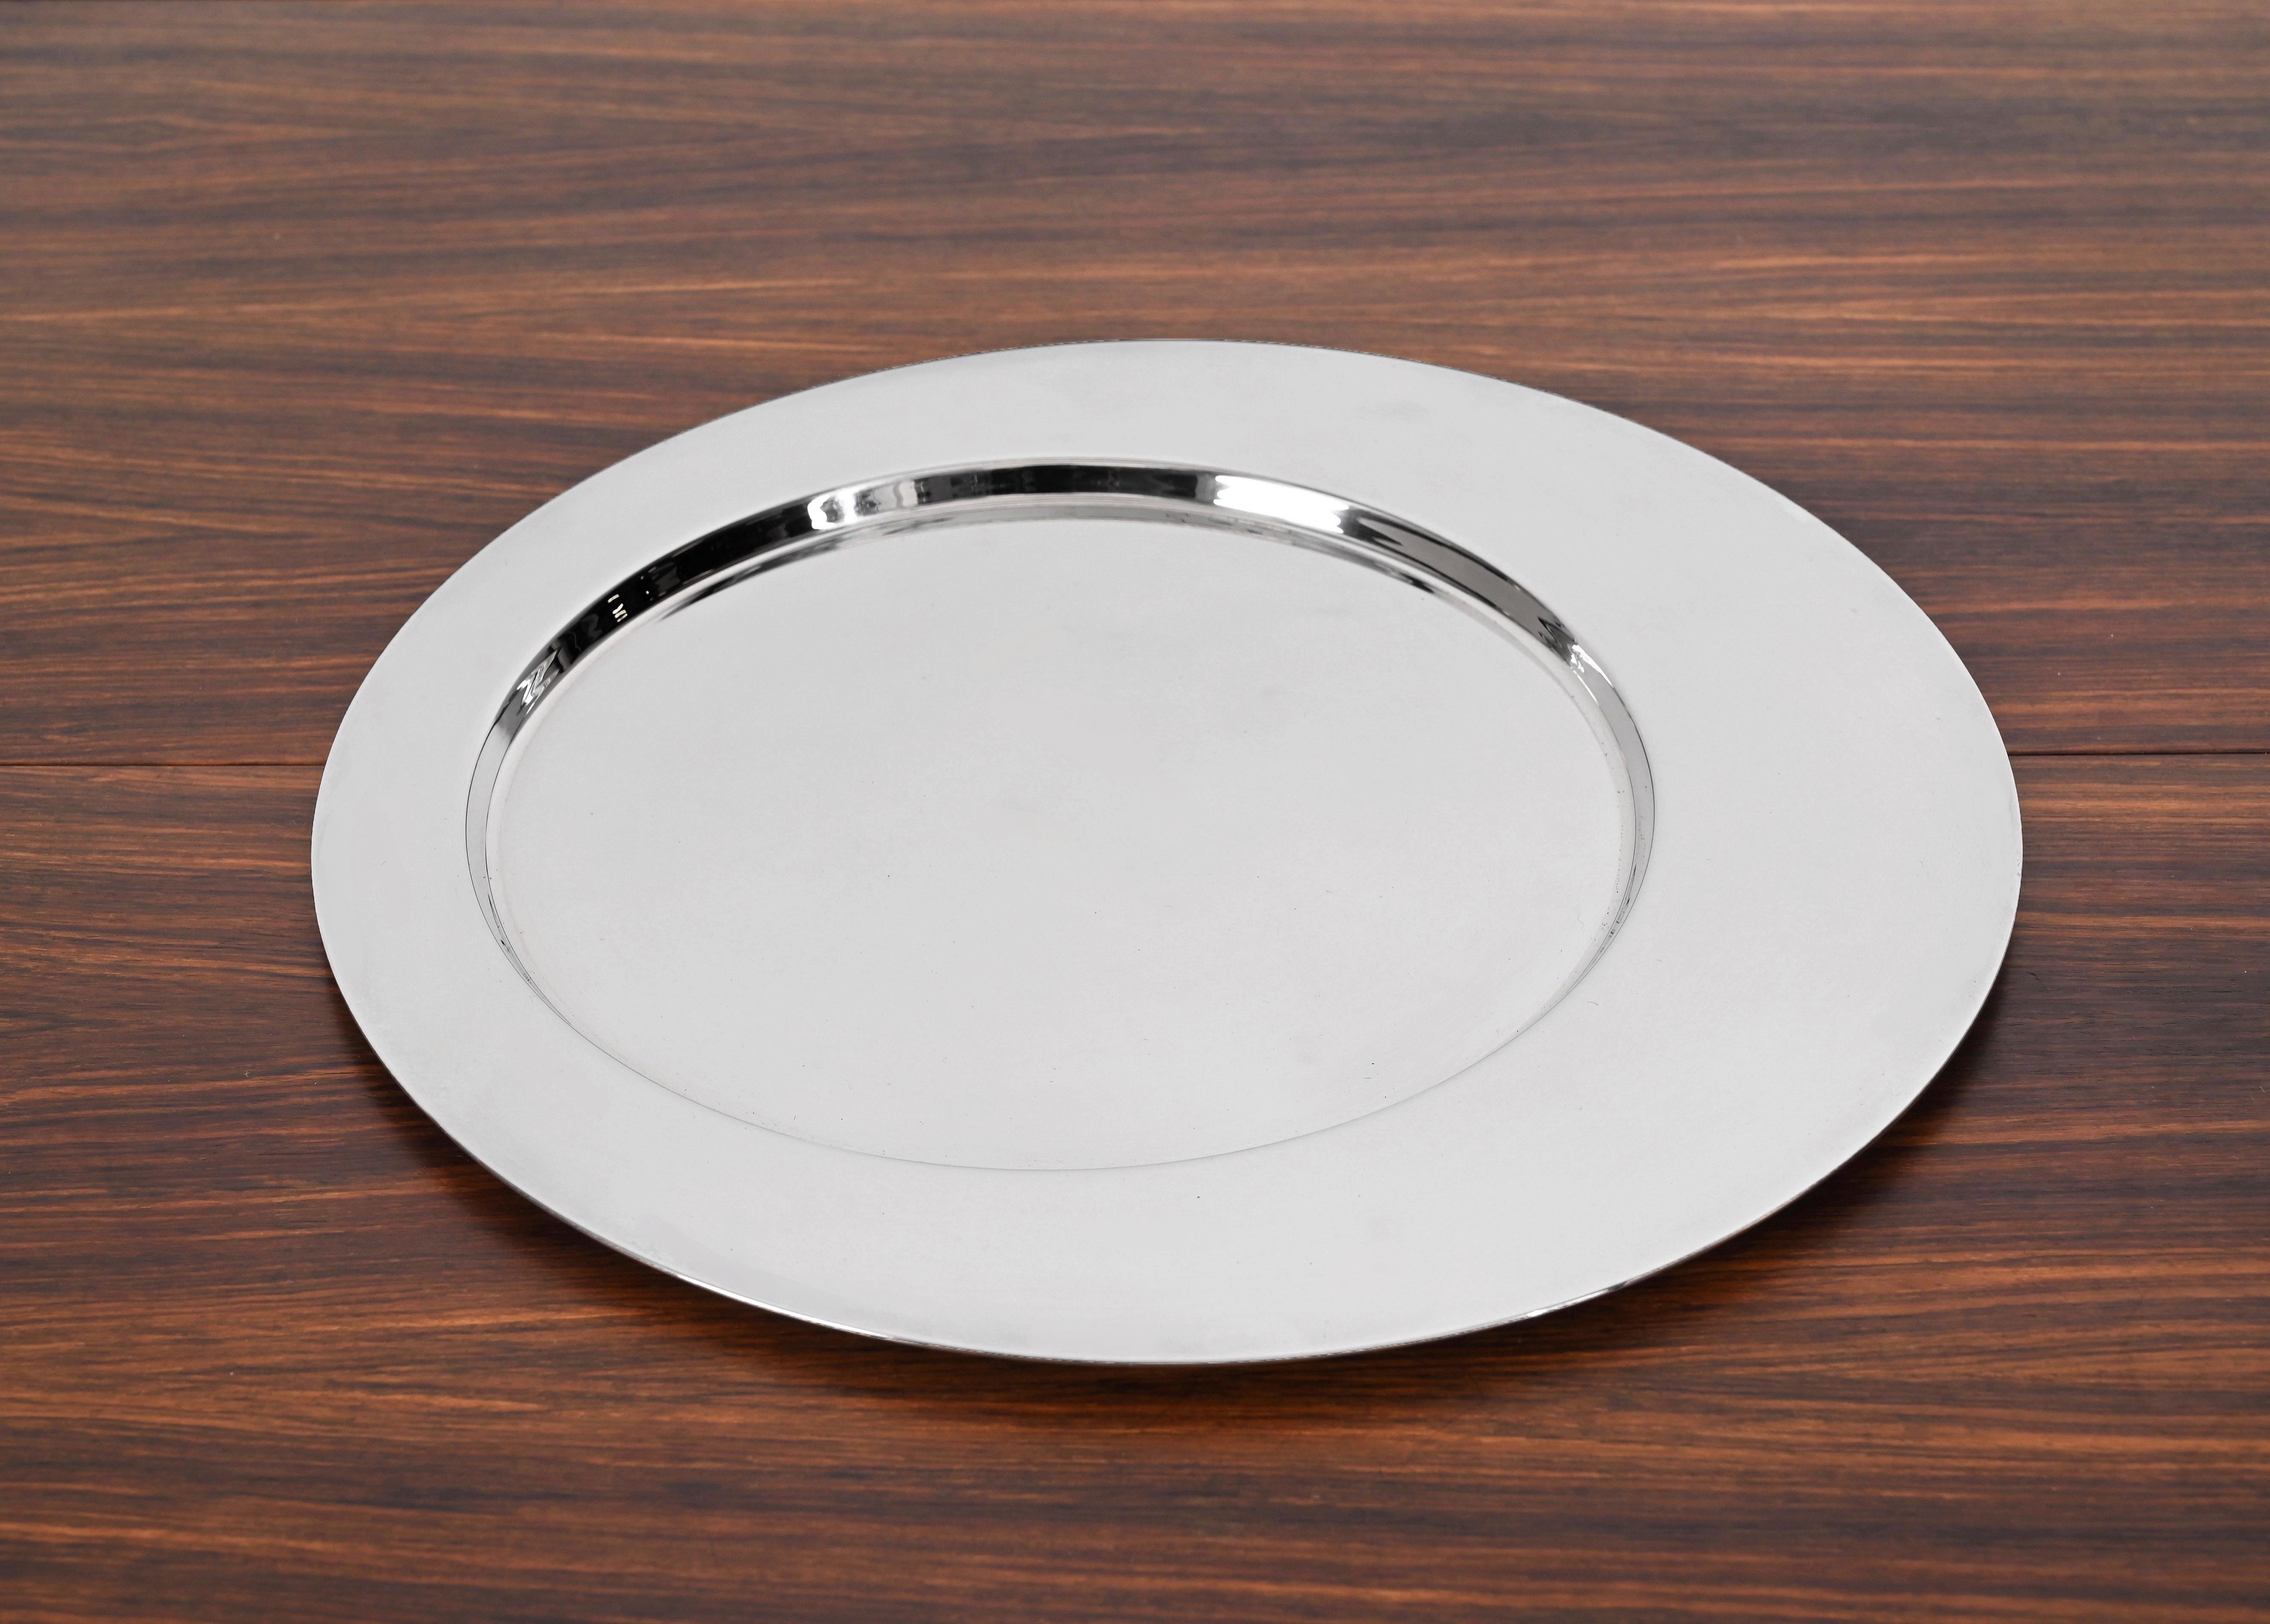 Gio Ponti for Cleto Munari Modernist Silver Plated Serving Plate Italy, 1980s For Sale 5